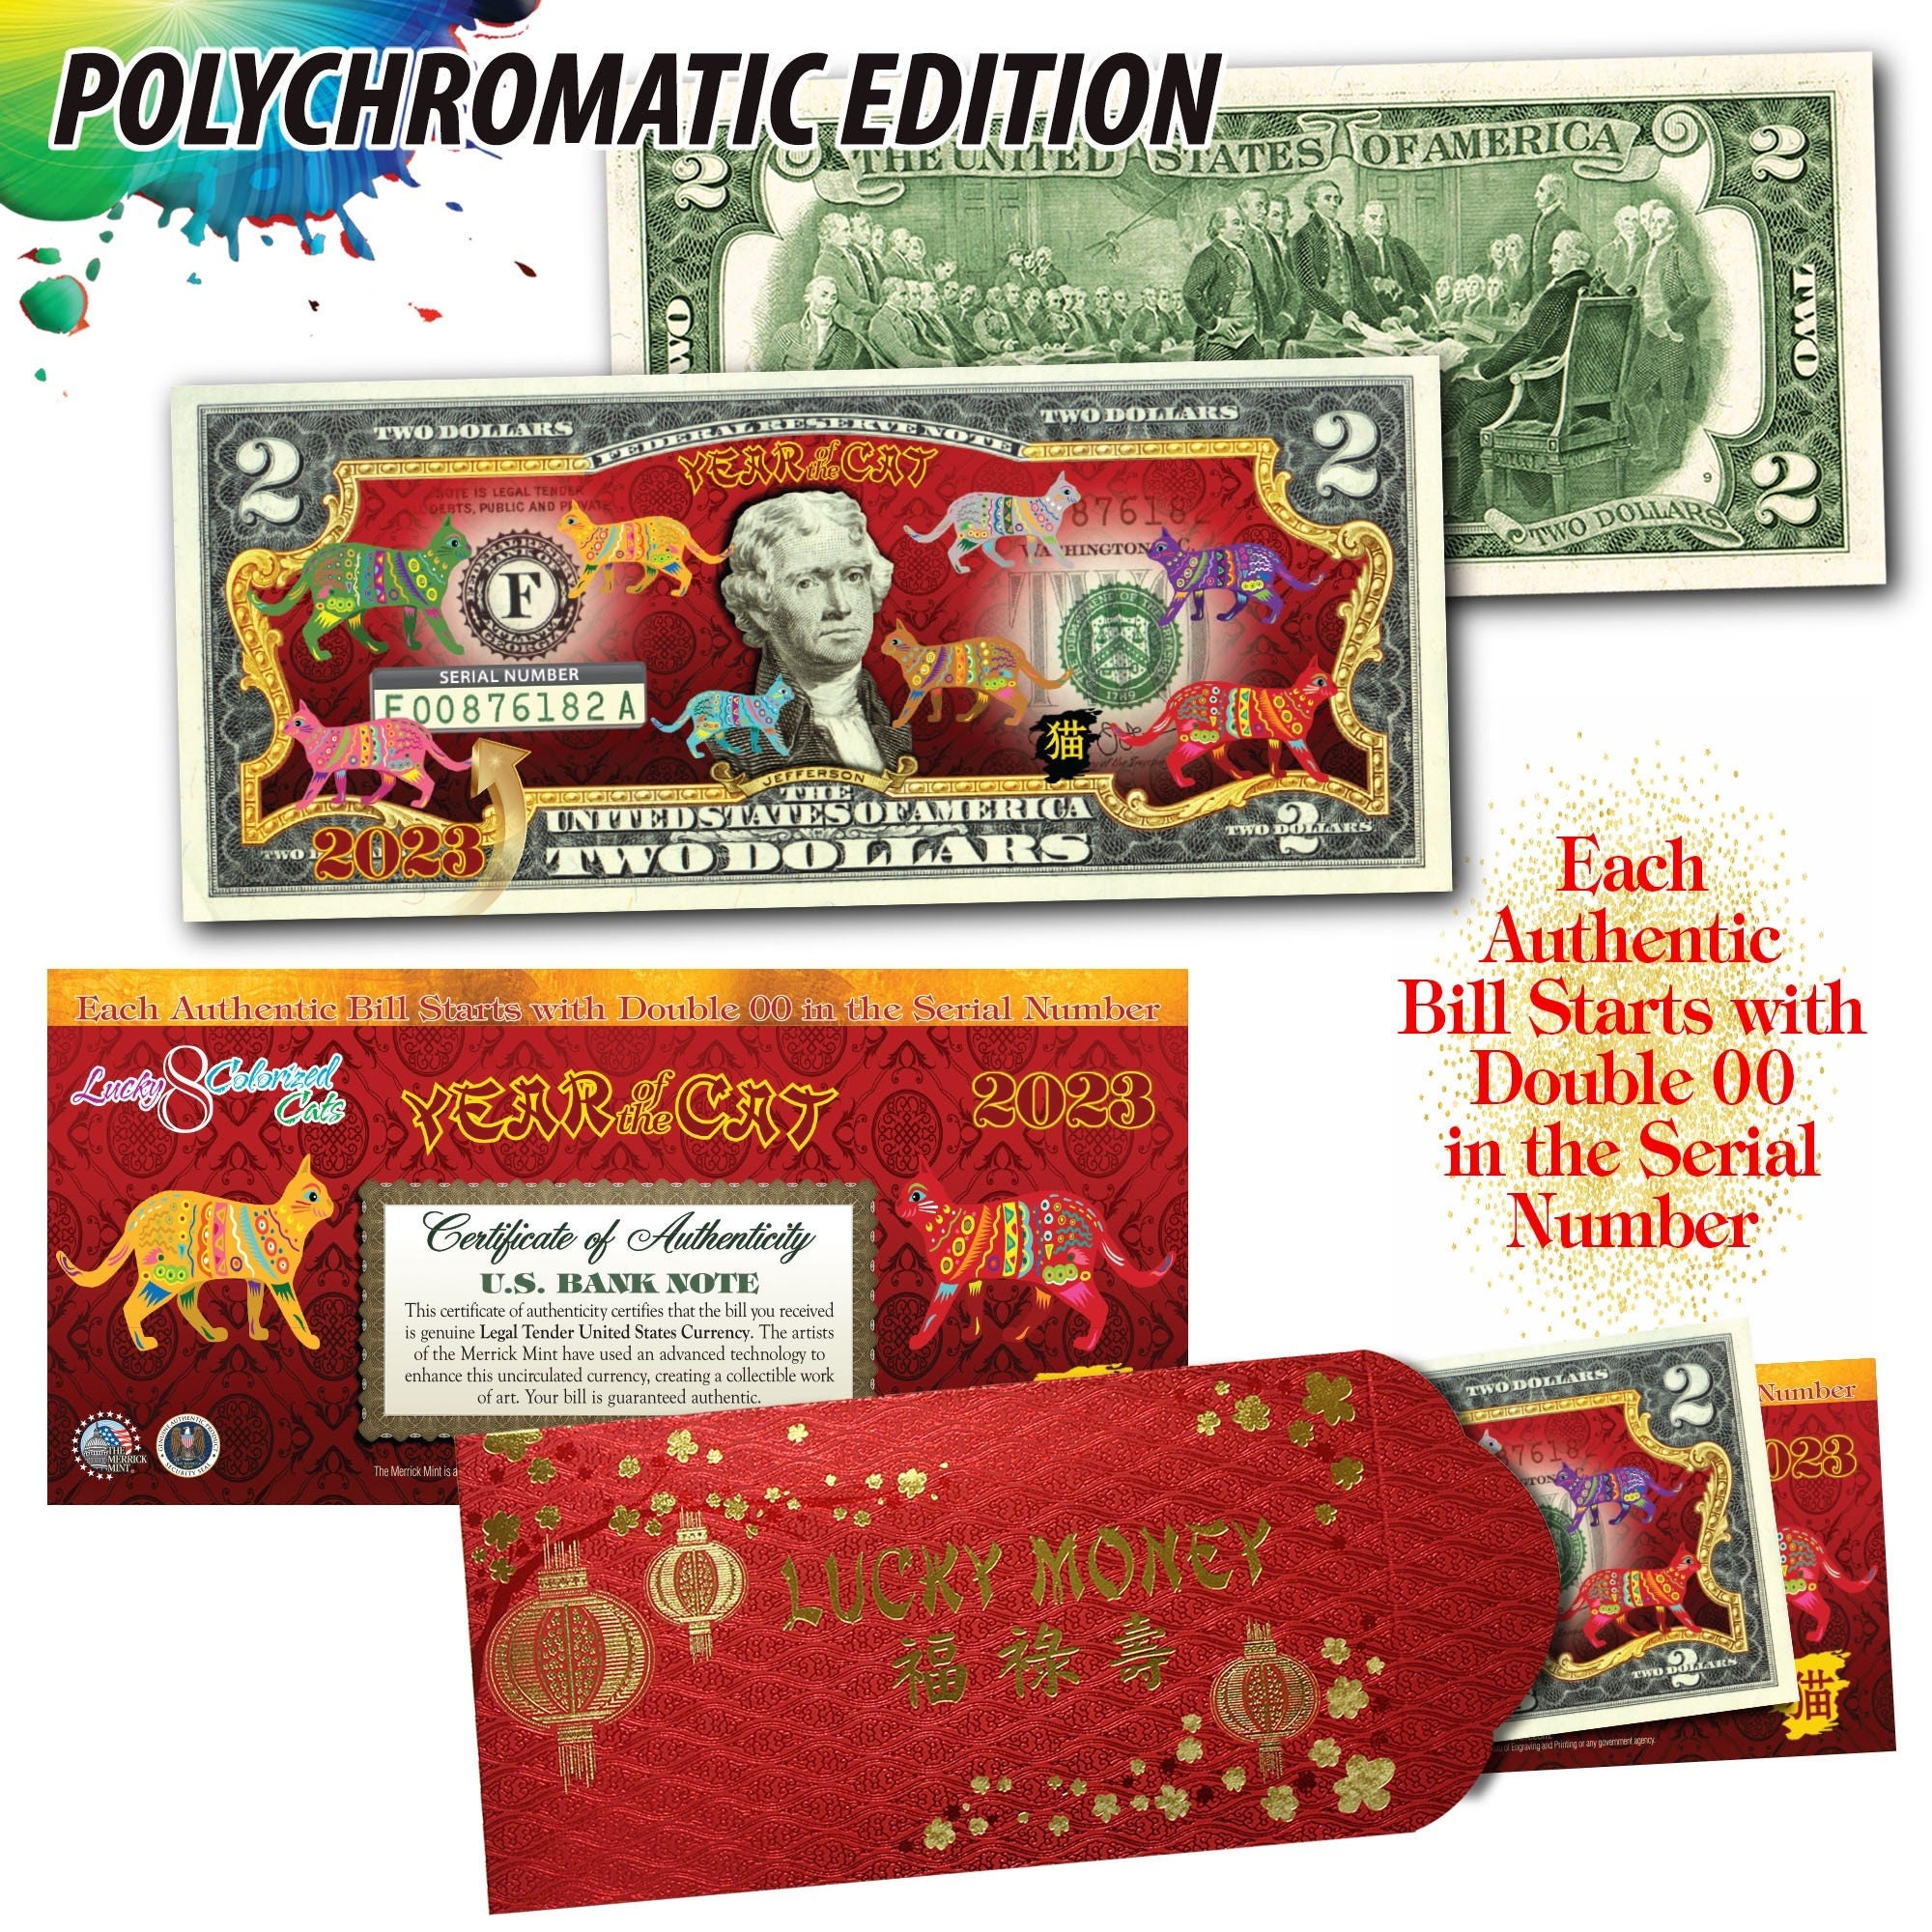 Close-up Of Vietnamese Red Envelopes With Money Being Presented On